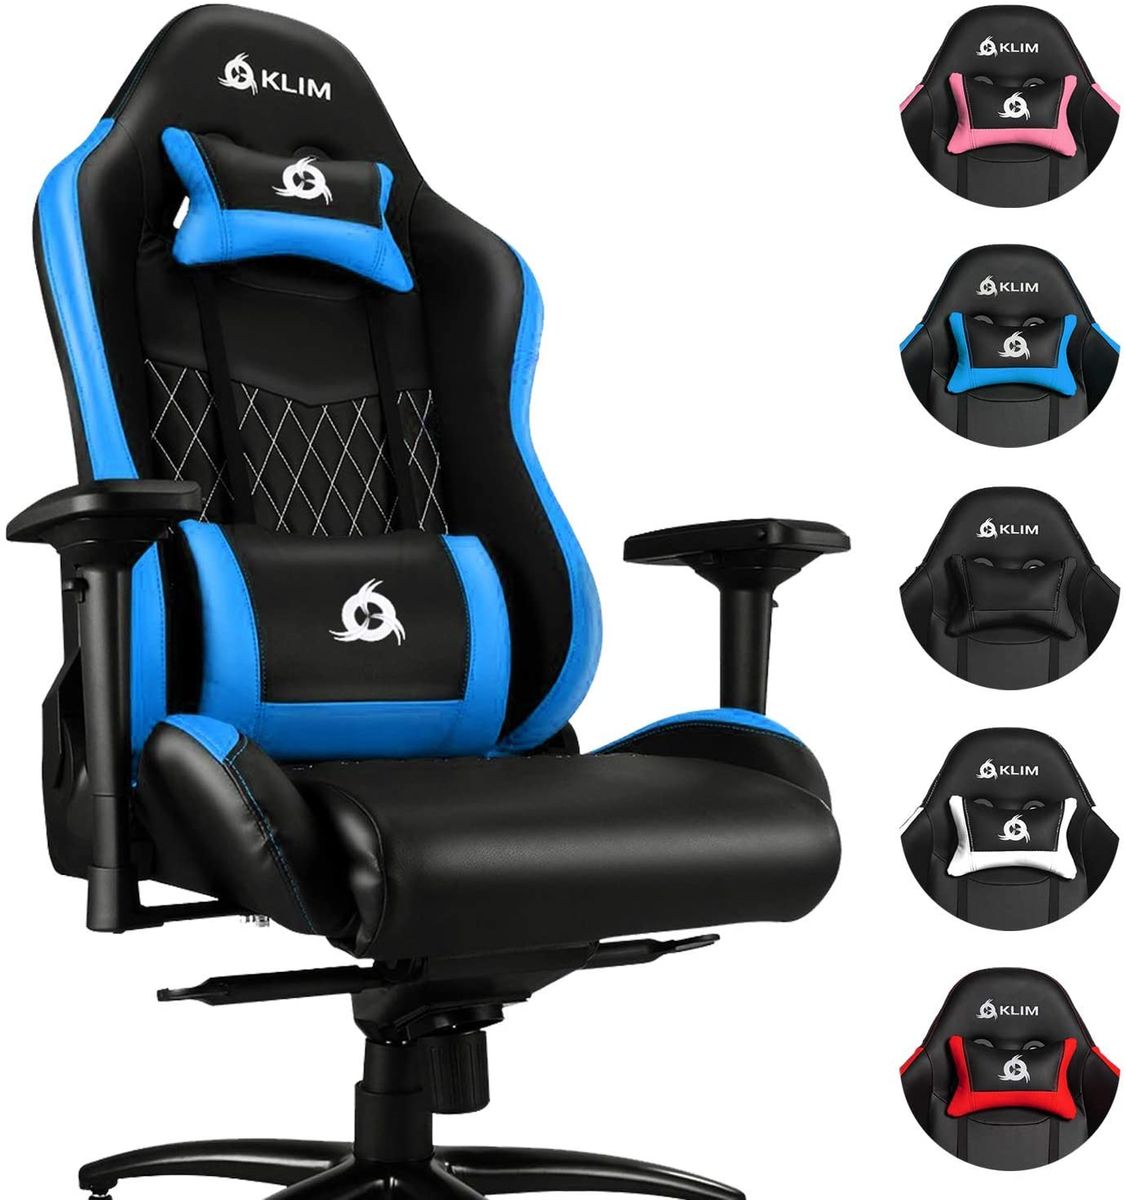 KLIM Esports - Gaming Chair + Leatherette and Premium High Quality Materials + Reclining Gamer Chair + Ergonomic with Lumbar and Neck Cushion + Blue Gaming Chair